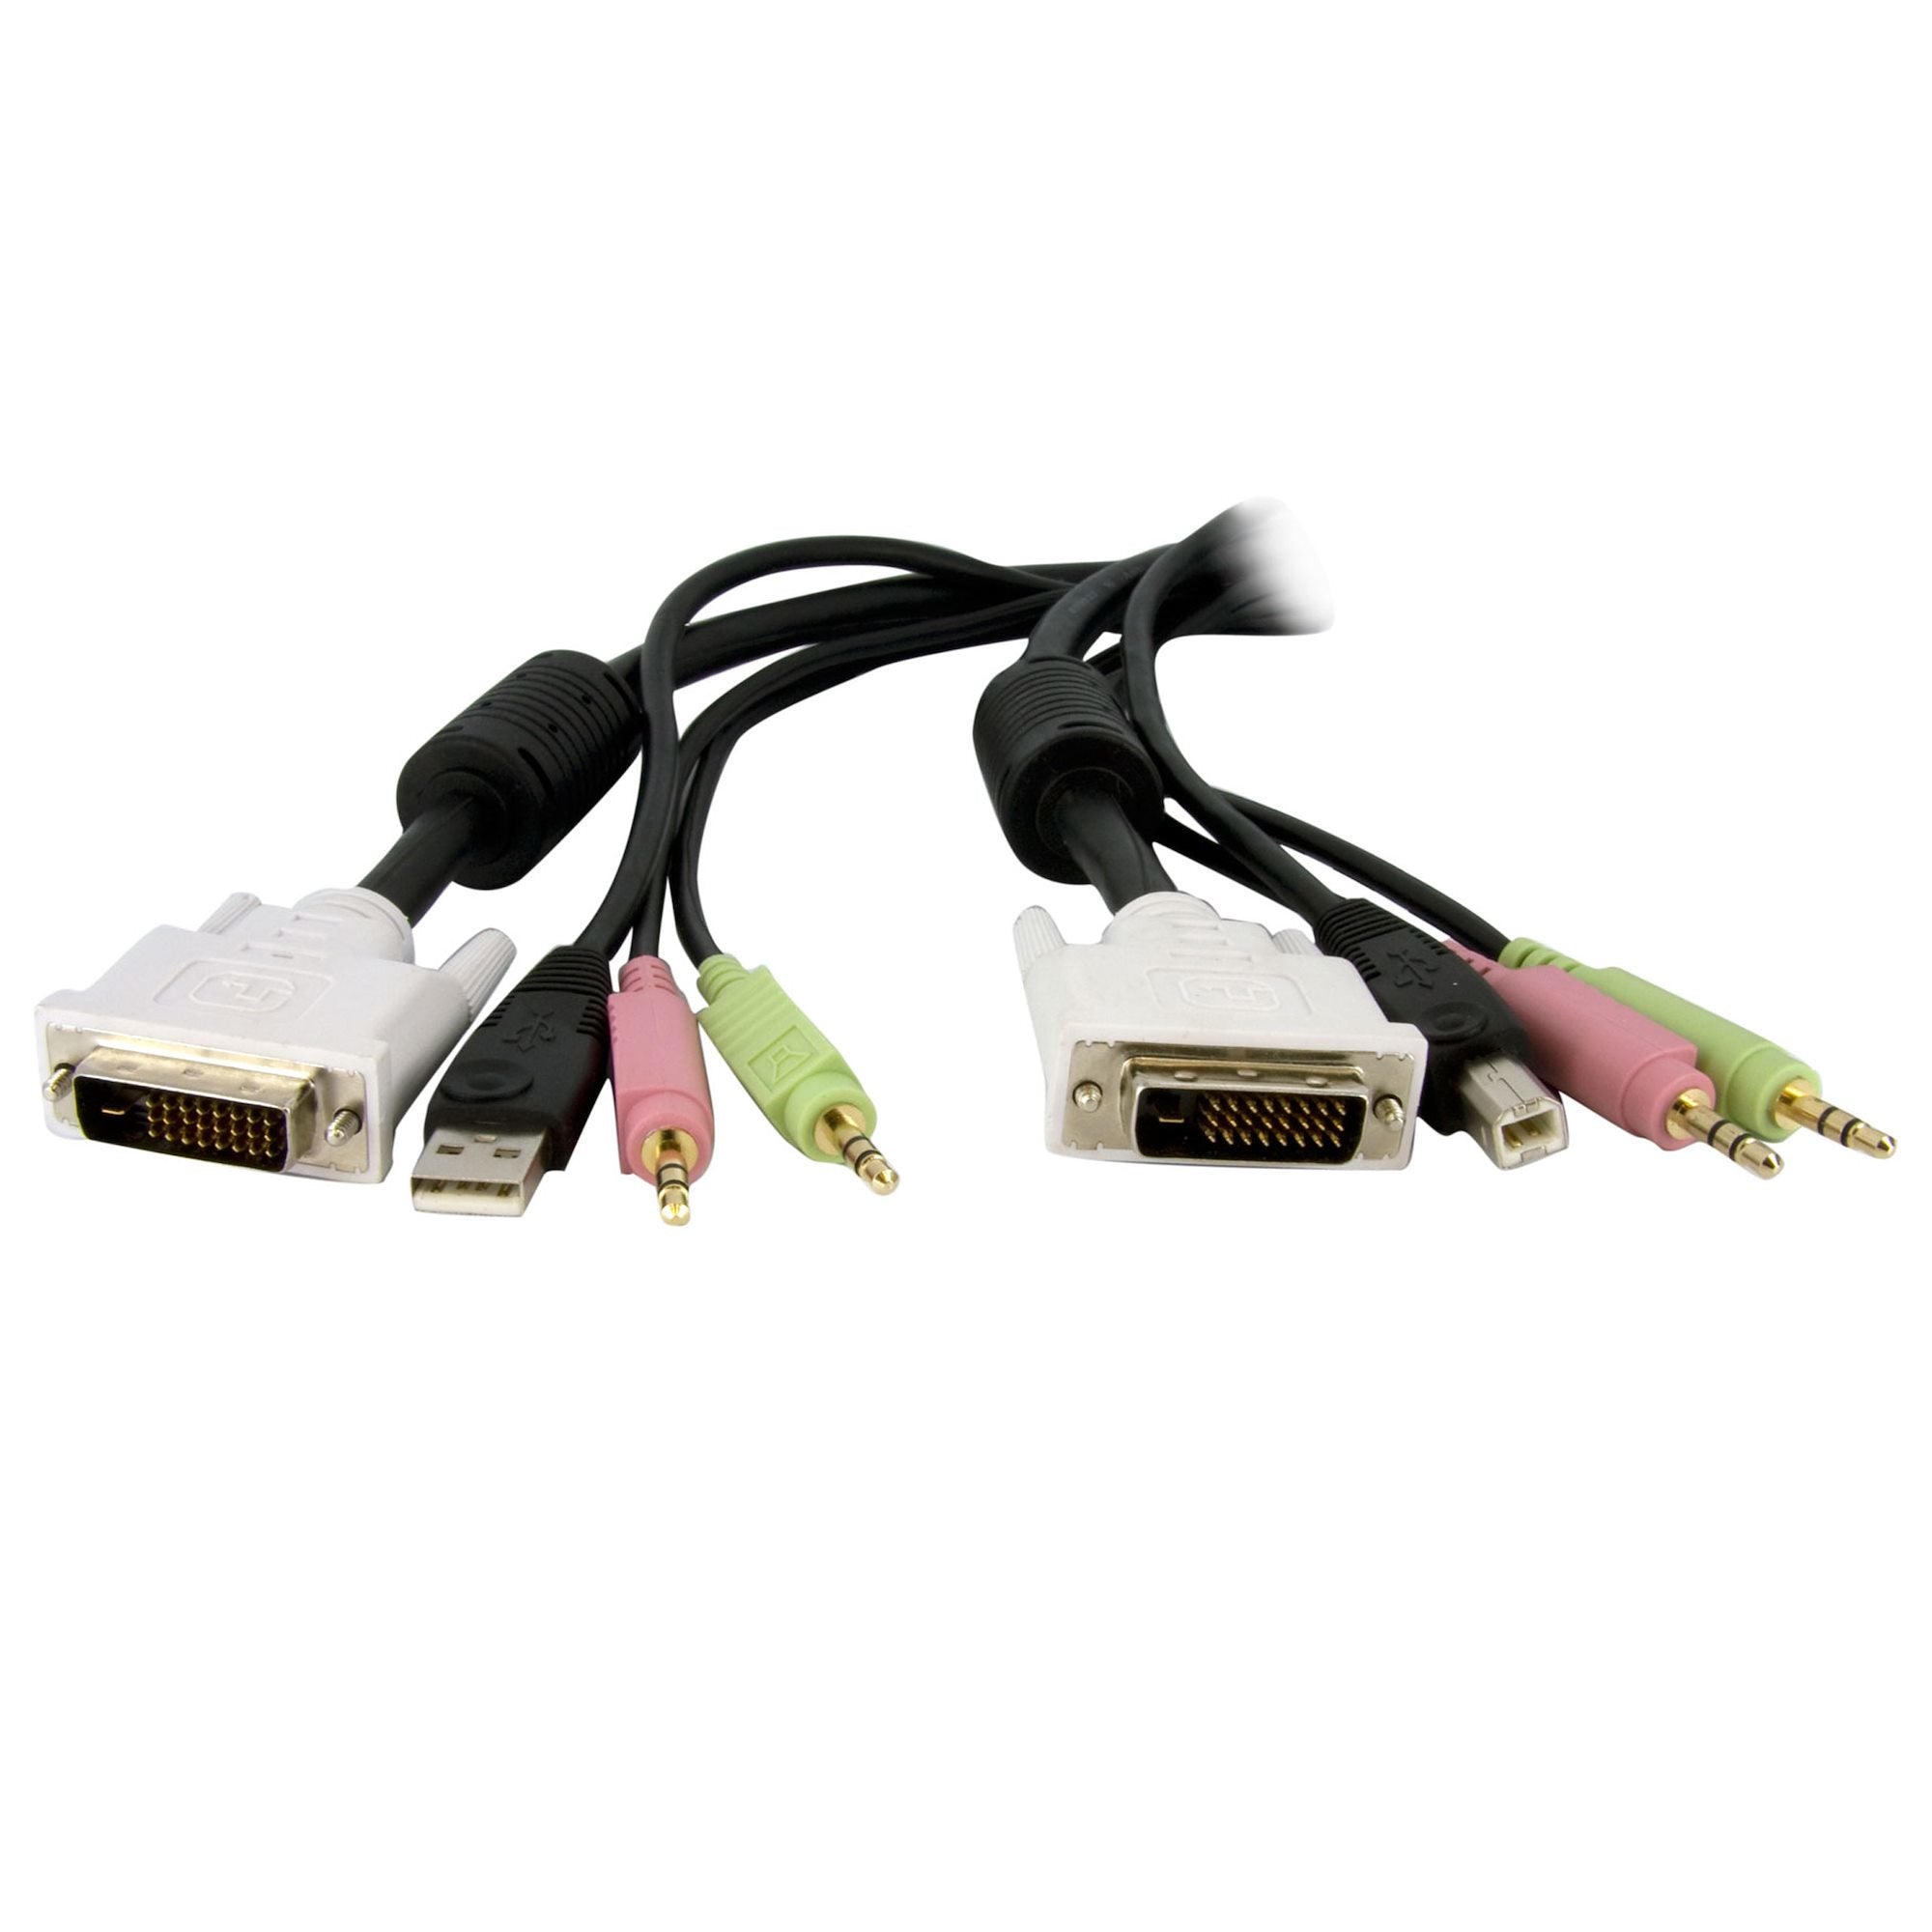 Startech Kvm Cable For DVI And USB Kvm Switches With Audio & Microphone - 6Ft-(DVID4N1USB6)